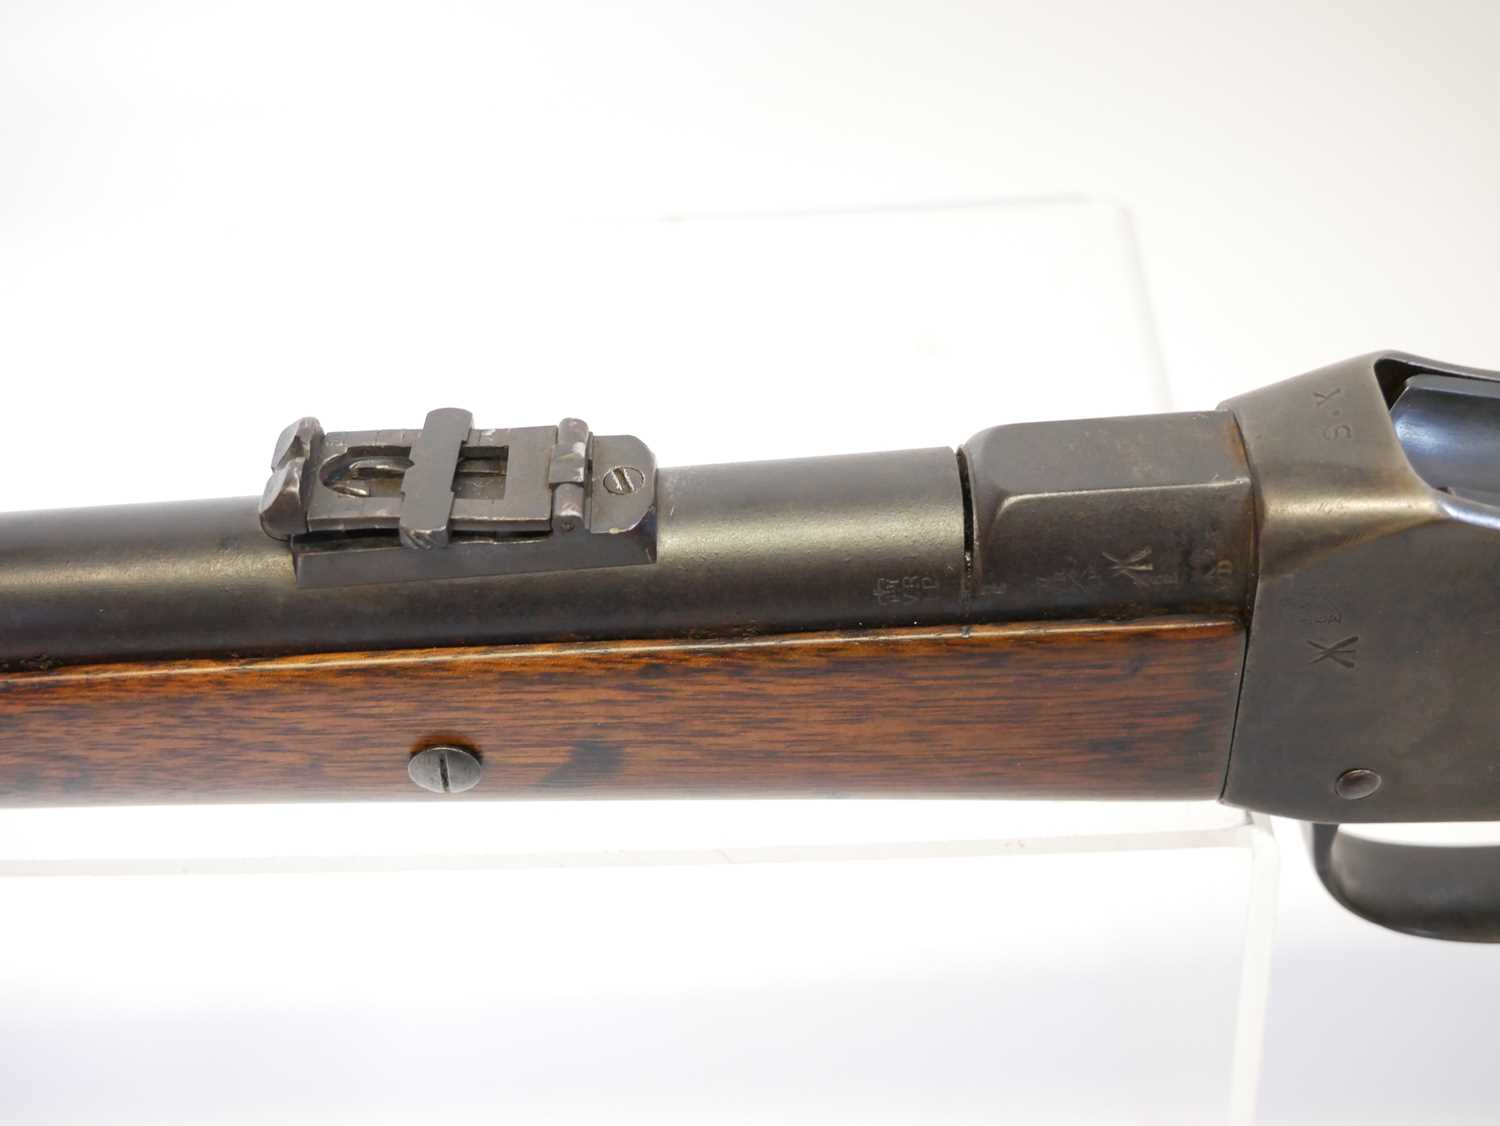 Enfield Martini Henry 577/450 Cavalry Carbine IC1, with 20.5 inch barrel (saw cut to the breech) - Image 16 of 18